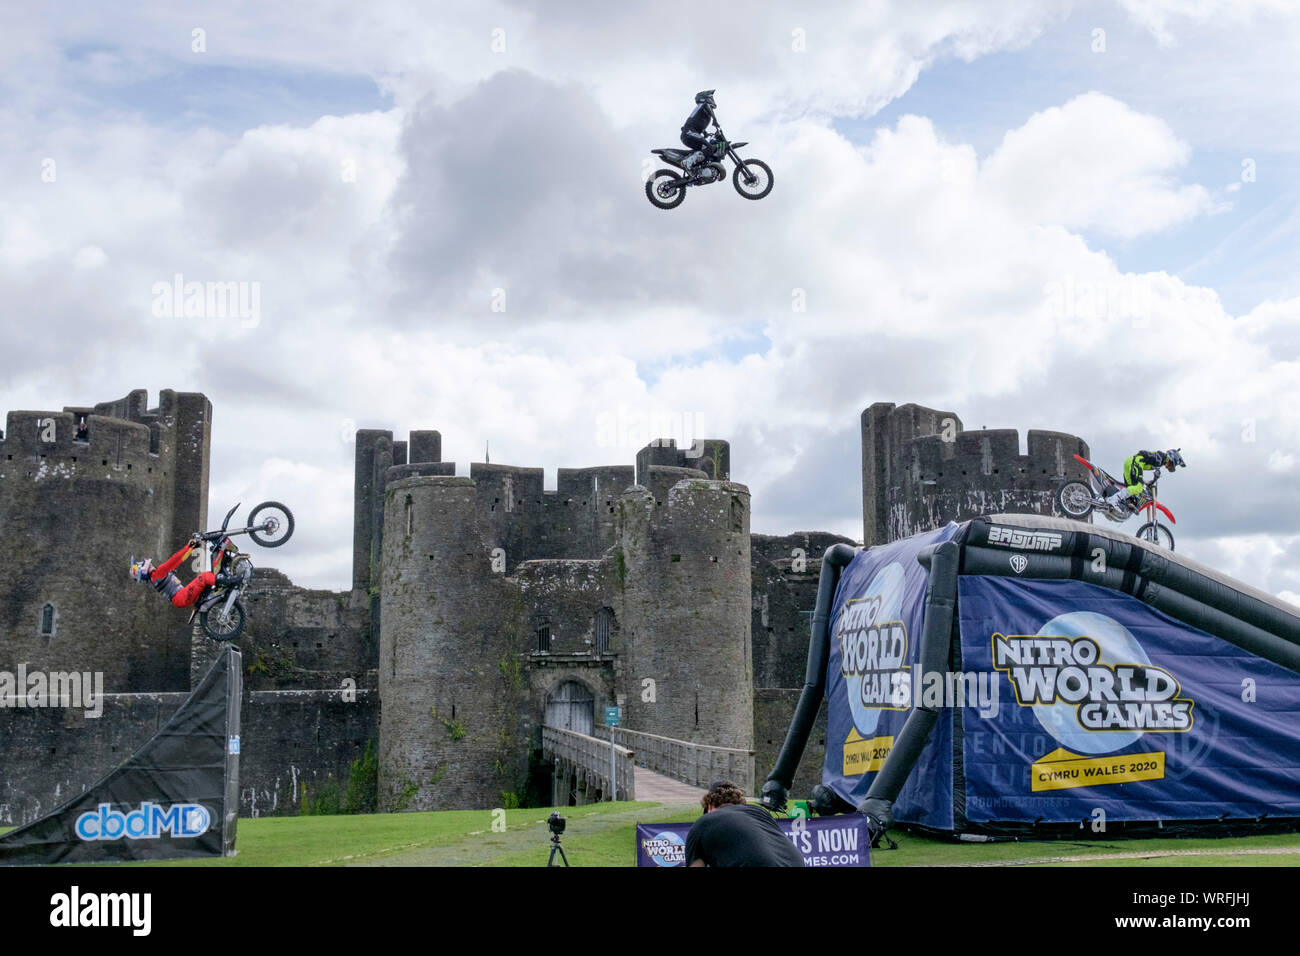 Caerphilly, Wales, UK. 10th September 2019. Three Freestyle Motor Cross (FMX) stars perform the never seen before “synchronised double backflip train” in front of equally spectacular Caerphilly Castle. Stunt performers Jackson Strong, Josh Sheehan and Luc Ackerman, are amongst the most successful FMX stars in the world. The display promotes the upcoming 2020 Nitro World Games to be staged in the Principality Stadium in Cardiff. Credit: Mr Standfast/Alamy Live News Stock Photo